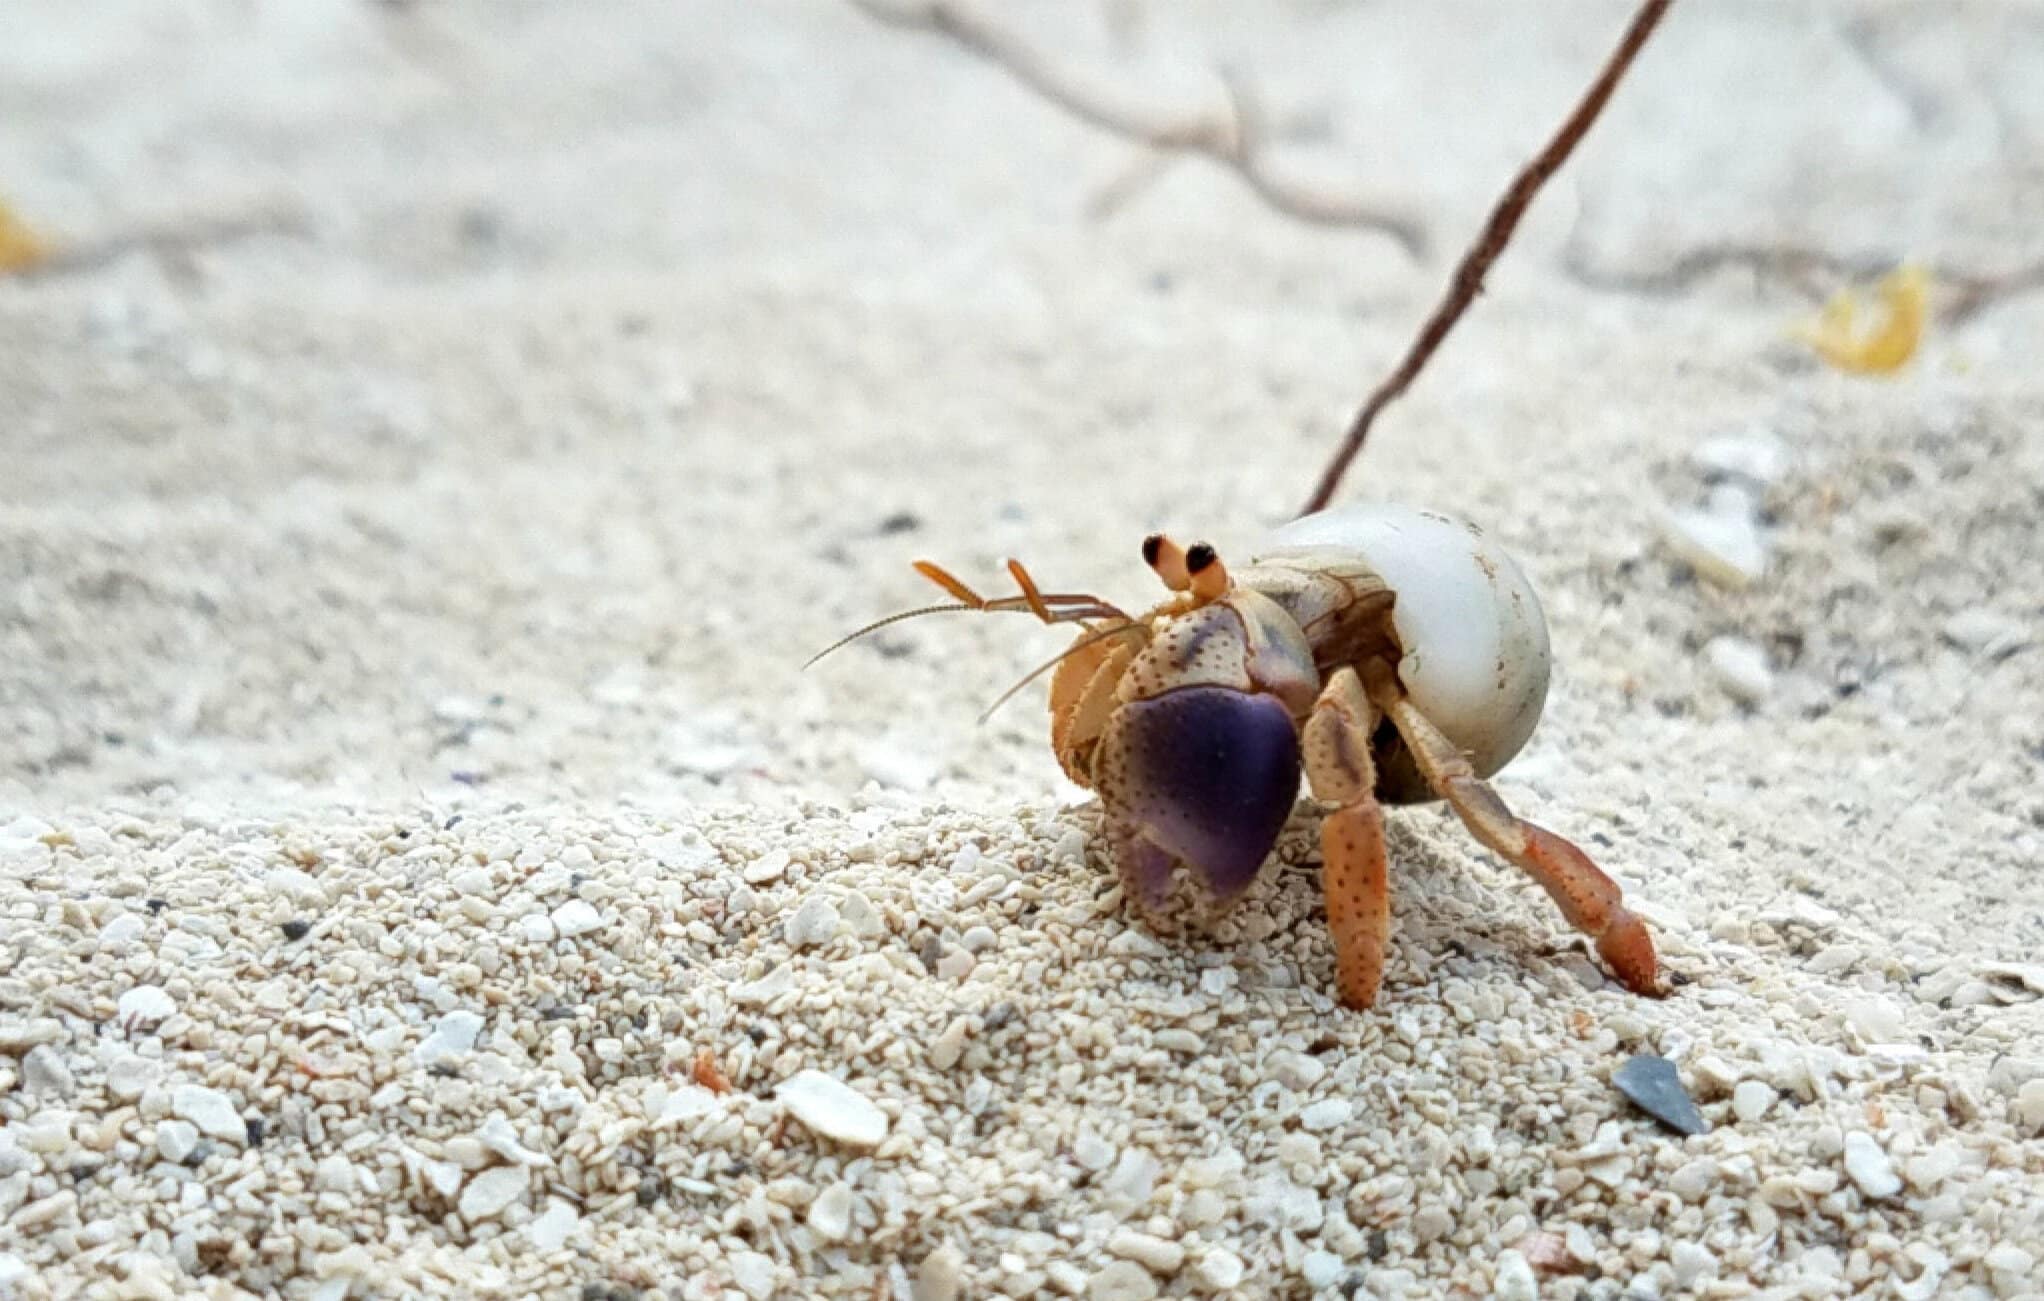 Where Do Hermit Crab Shells Come From